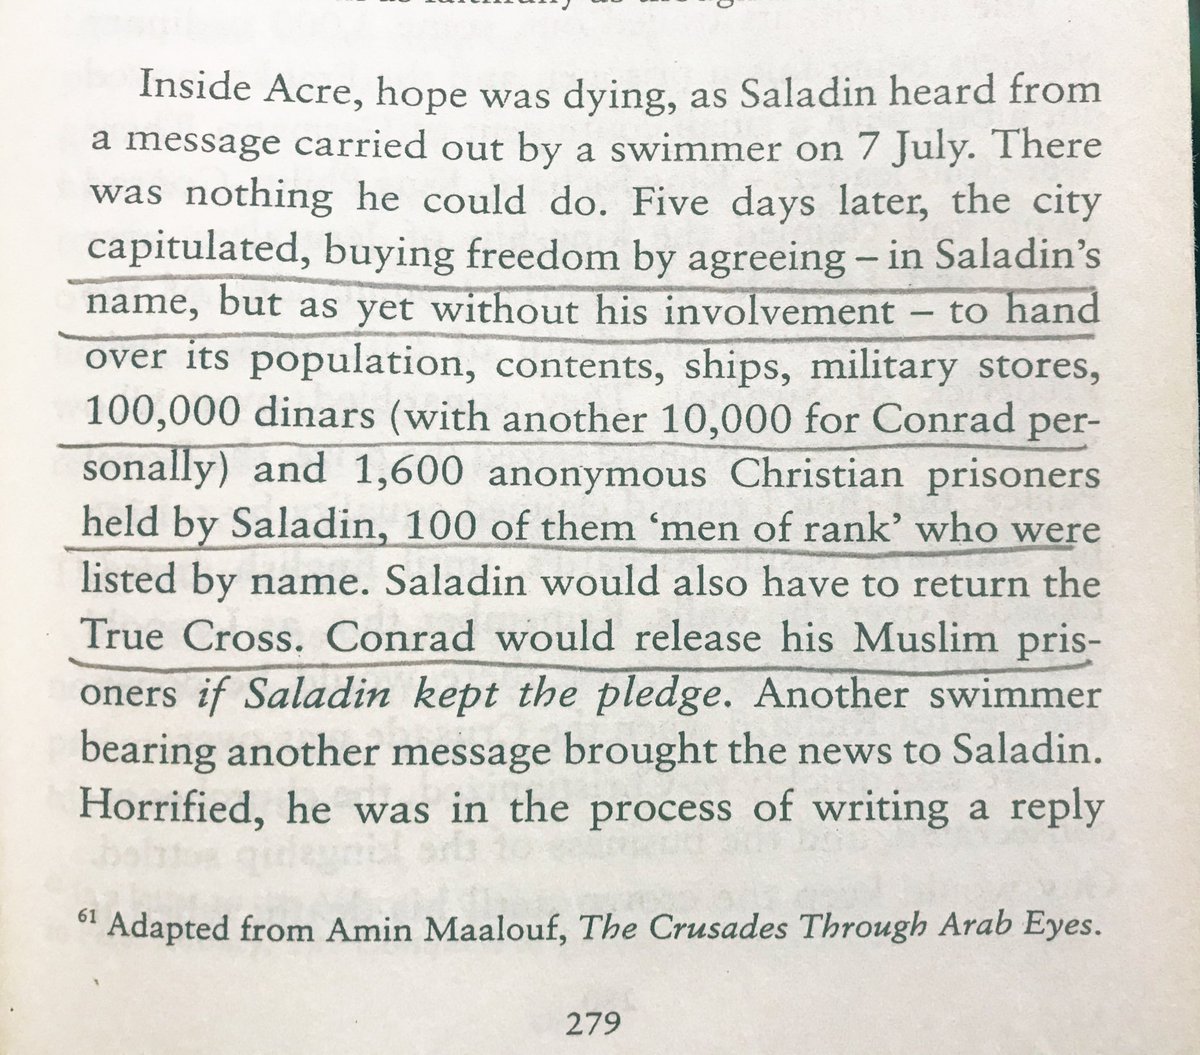 July 1191, reversal of gains, Saladin loses mainly due to non-cooperation from the Caliph. Who feared the rise of Saladin.  #SaladinBiography authored by John Man  #100books2020  #bookscache